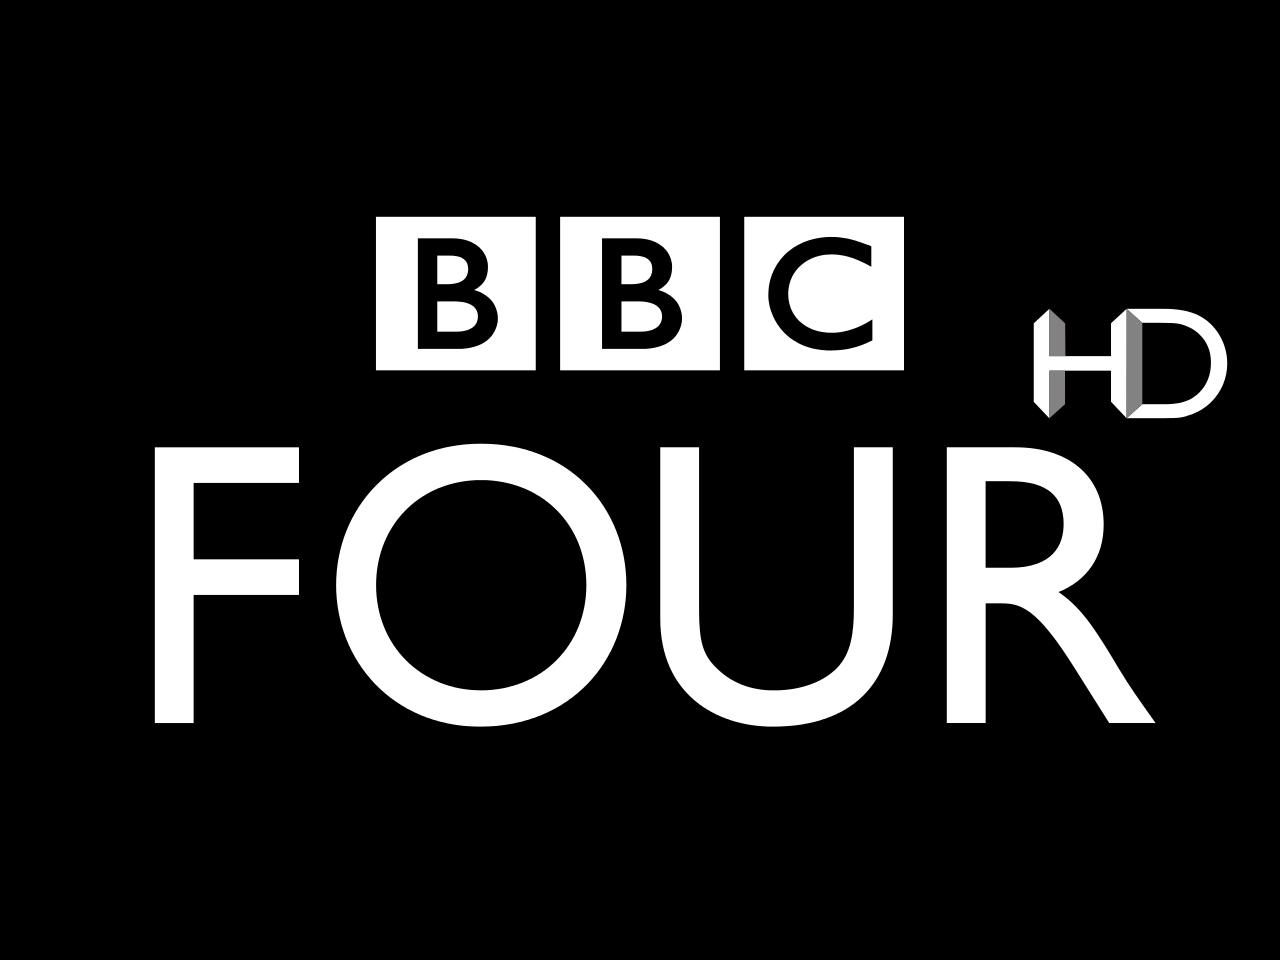 BBC Four HD.png